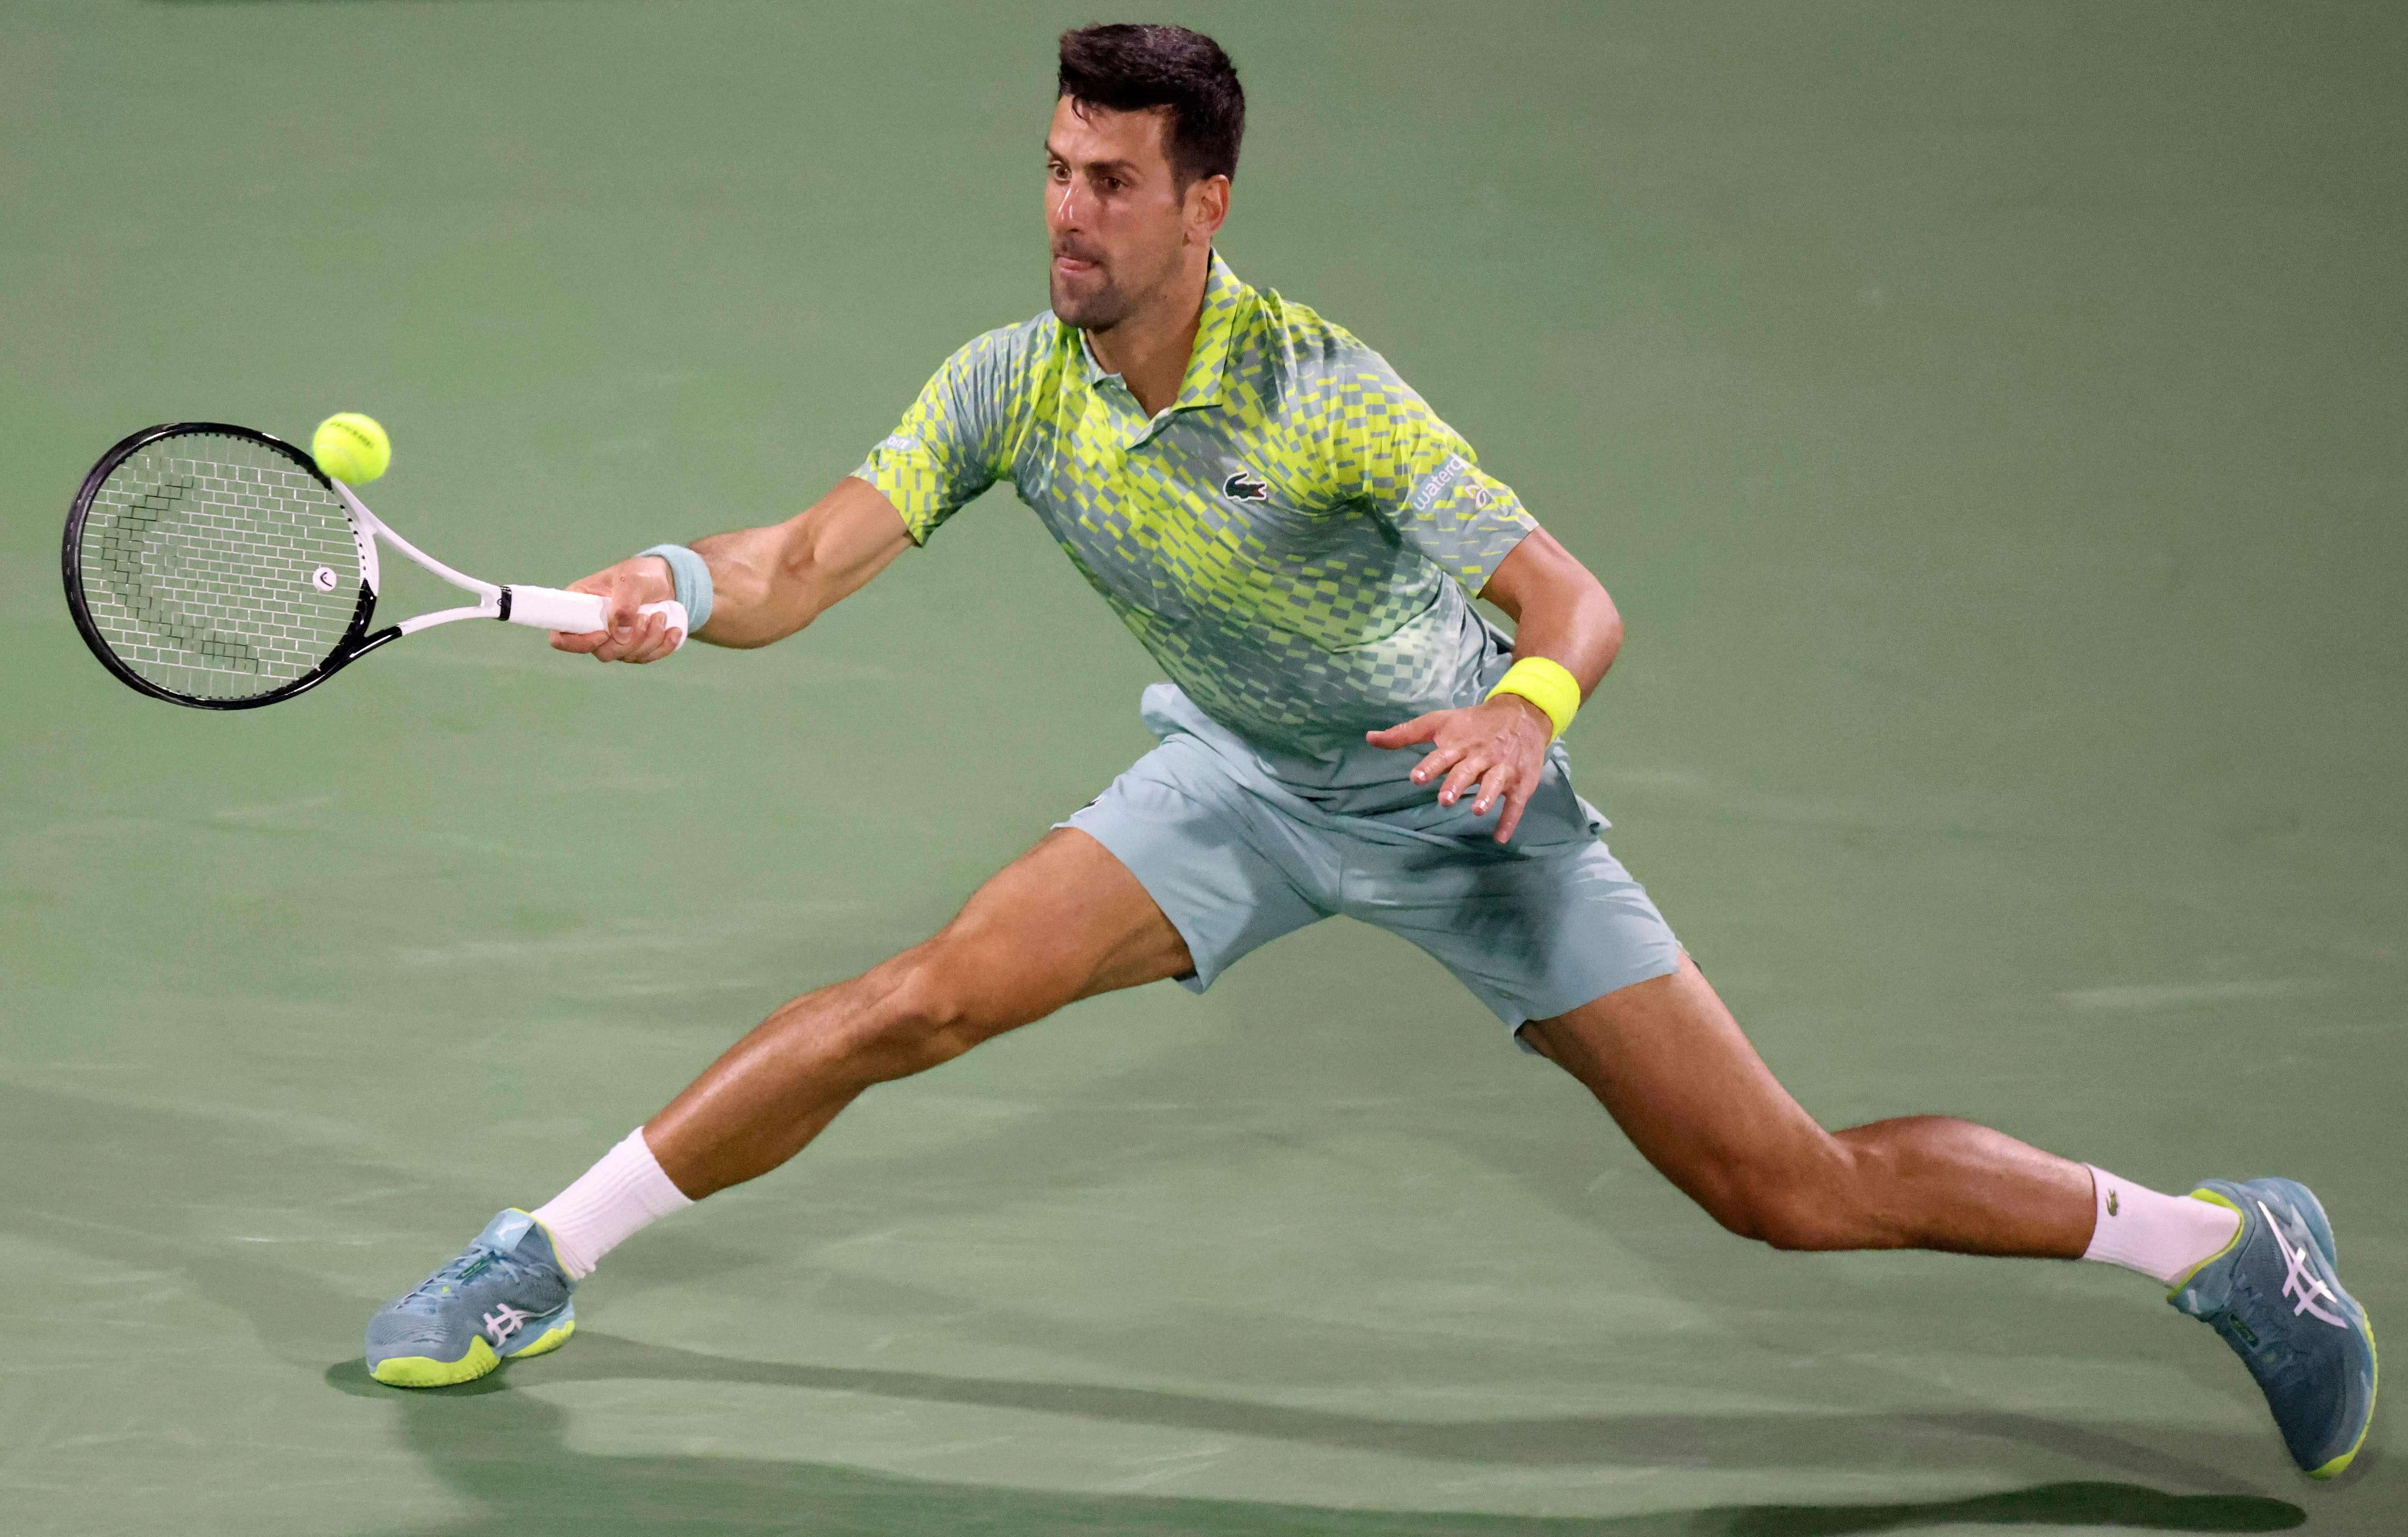 Djokovic's first-round victory on Tuesday came a day after the 35-year-old Serb broke the record for the most time spent at No. 1 in the professional tennis rankings by a man or woman. Credit: AFP Photo